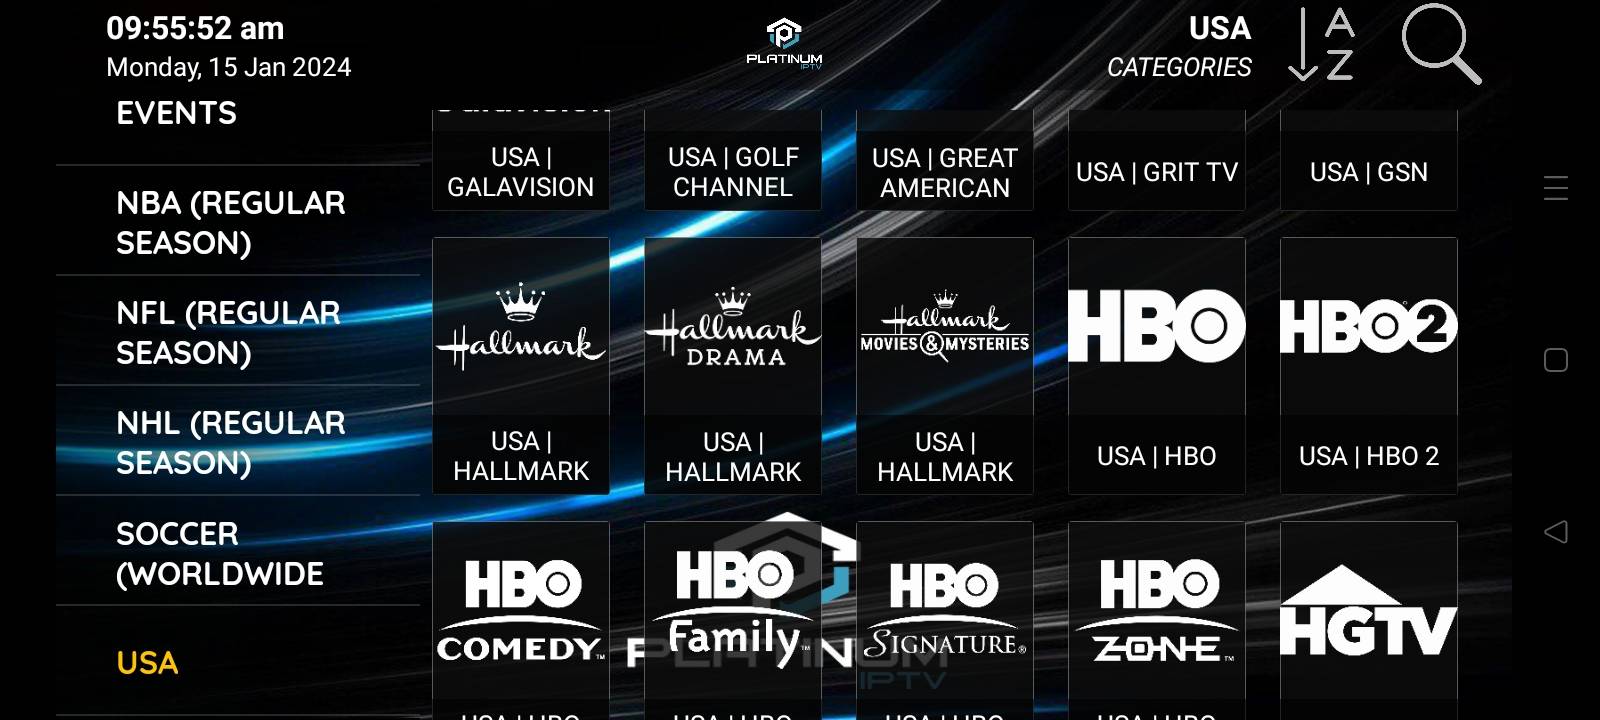 USA channel with HBO live channel